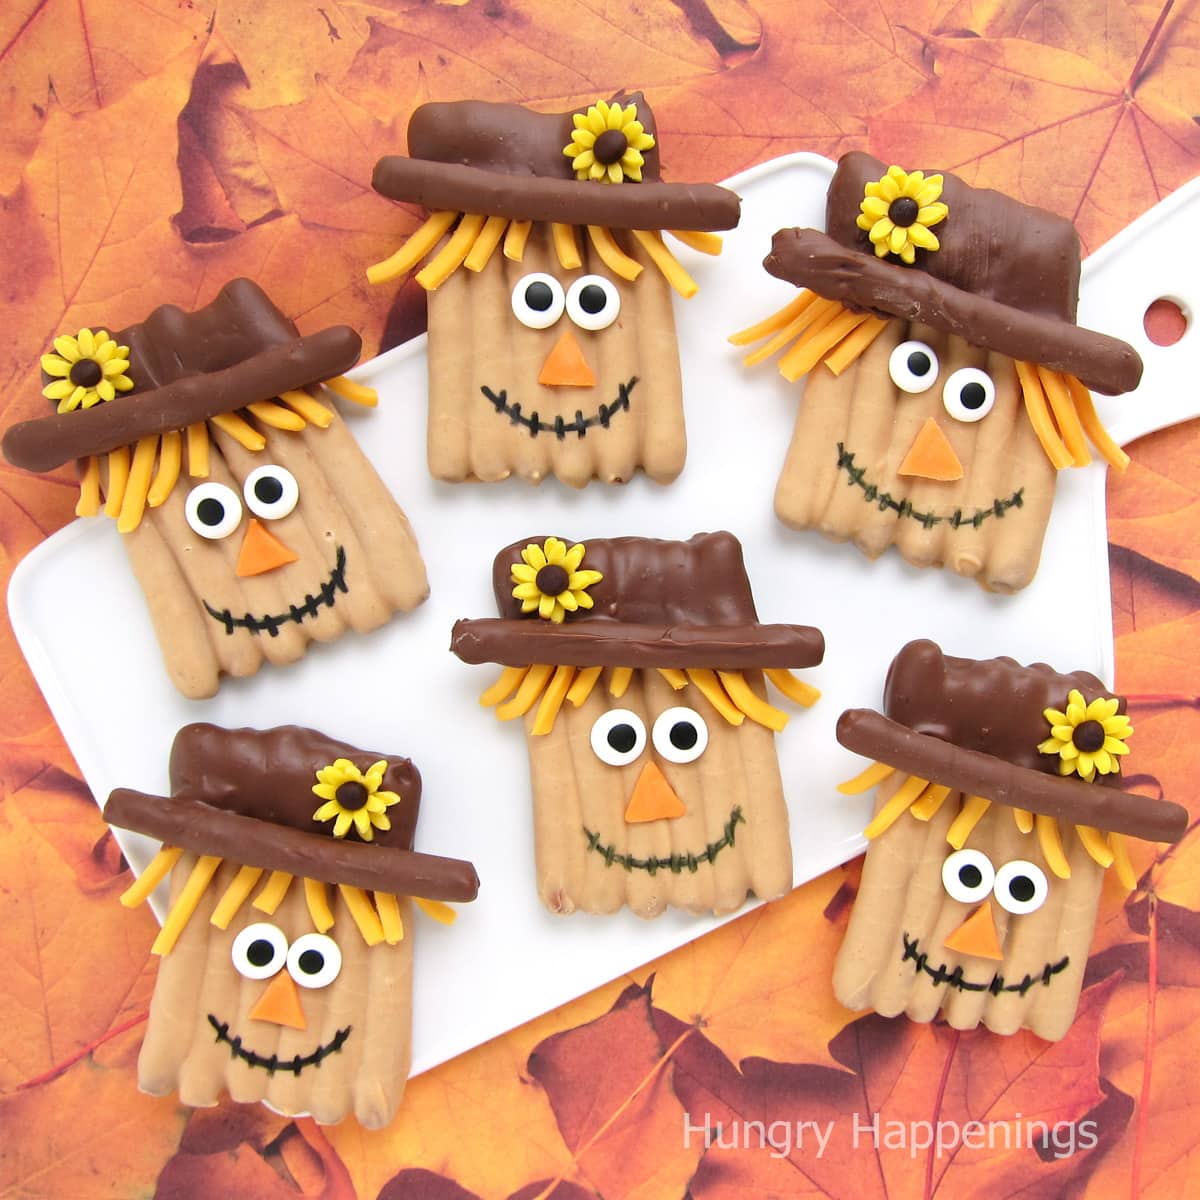 scarecrow pretzels dipped with chocolate and peanut butter coating.